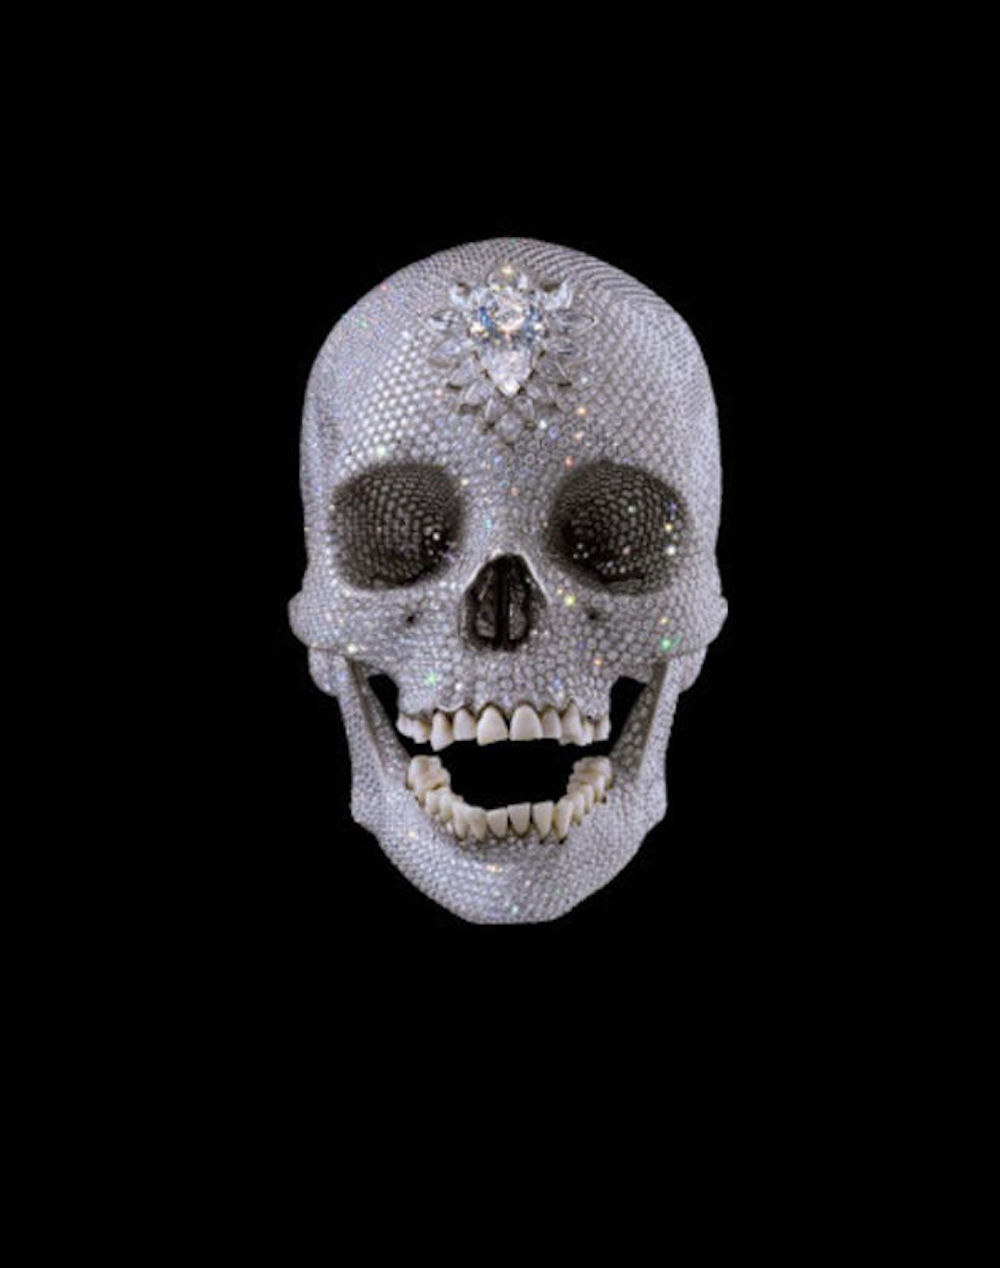 The Wick - Damien Hirst, For the Love of God, 2011